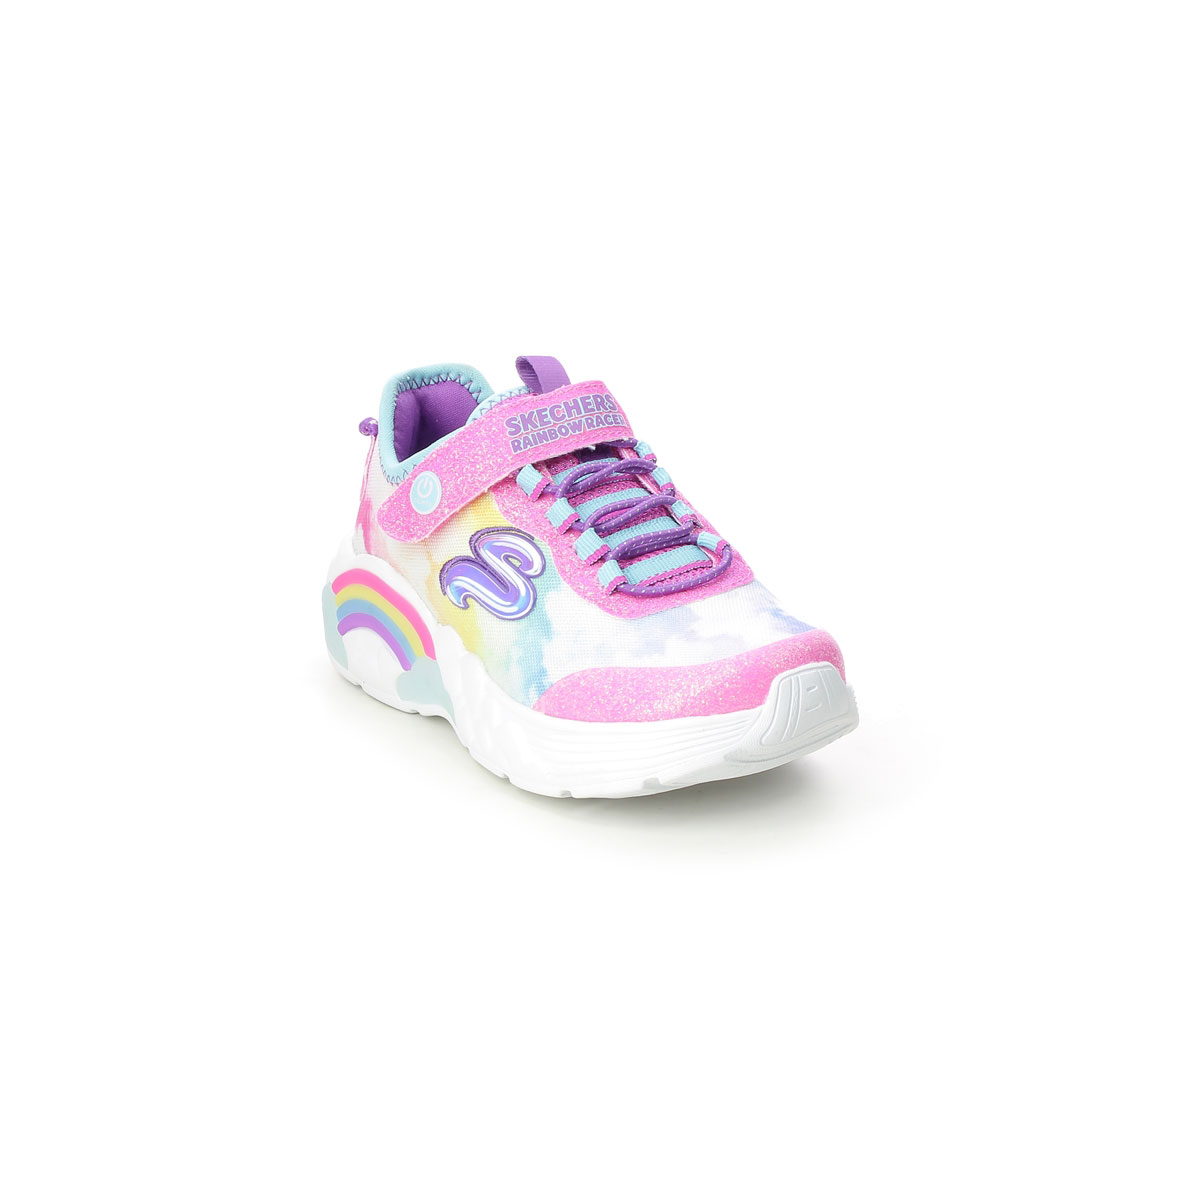 Skechers Rainbow Racer Pink Kids Girls Trainers 302300L In Size 31 In Plain Pink For kids